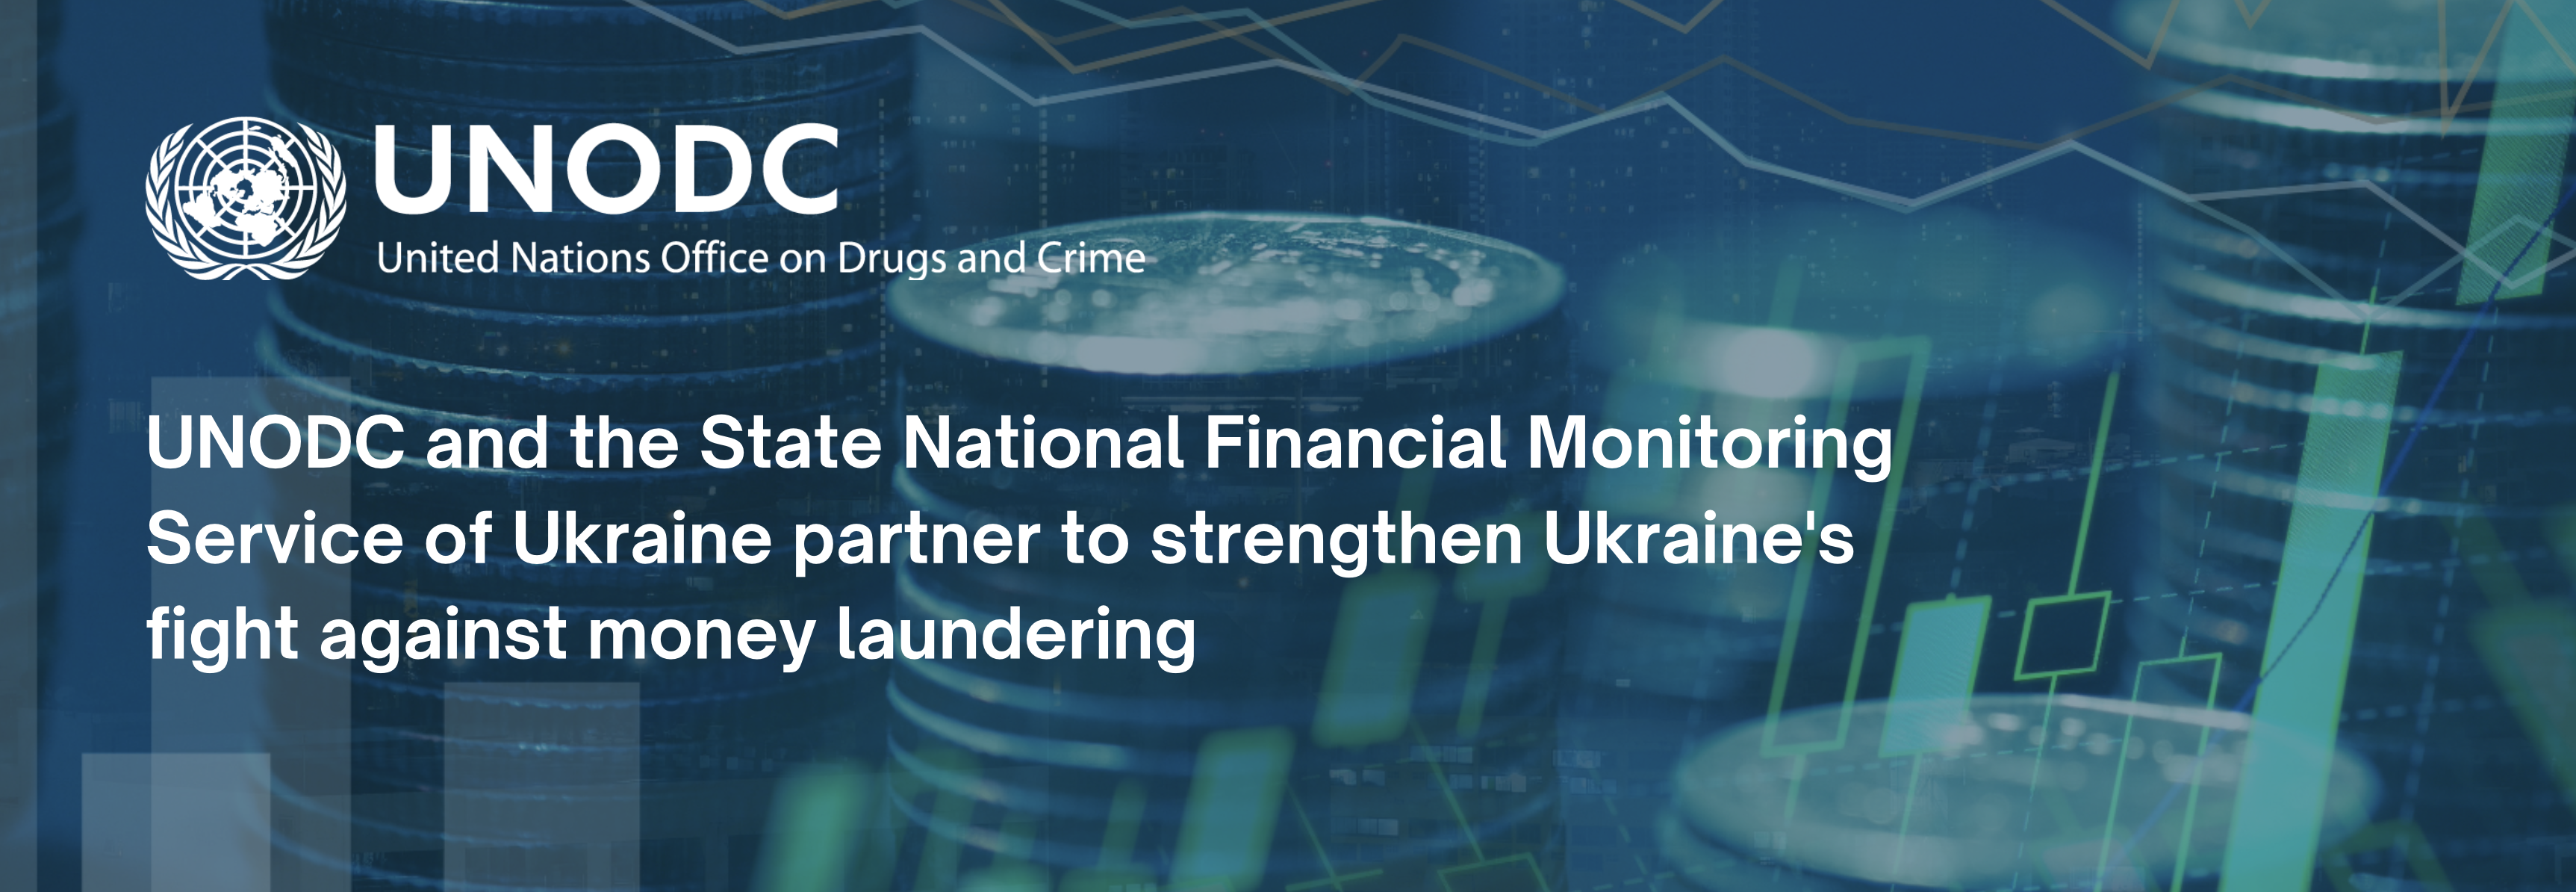 Webstory: UNODC & the State National Financial Monitoring Service of Ukraine partner to strengthen Ukraine's fight against money laundering